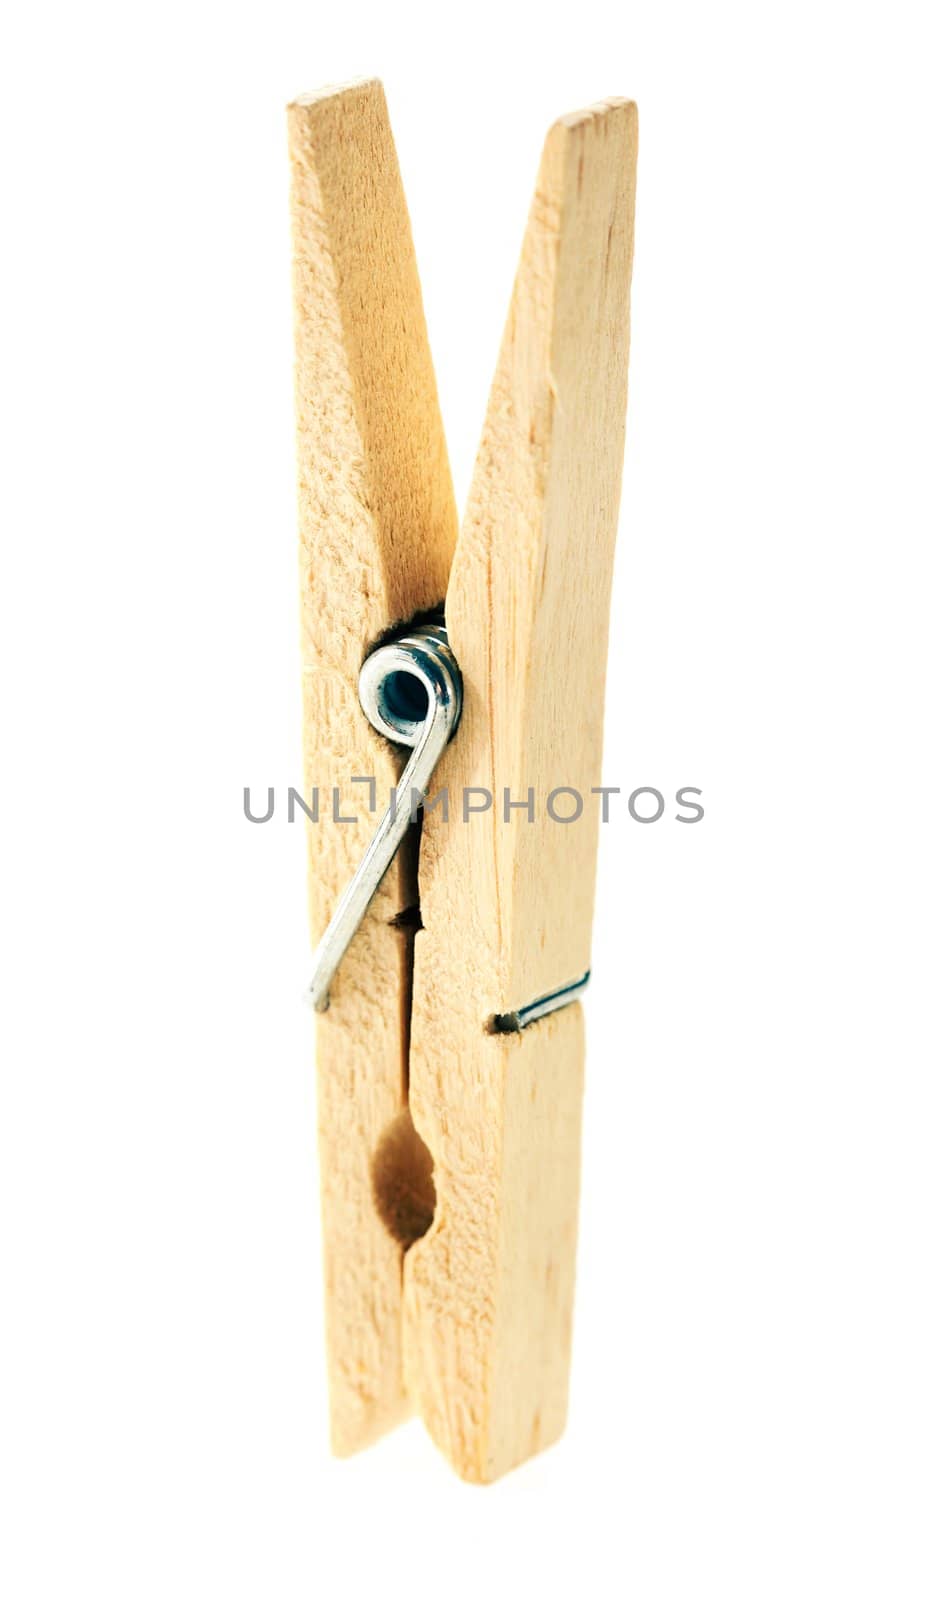 Wooden clothespin by Stocksnapper